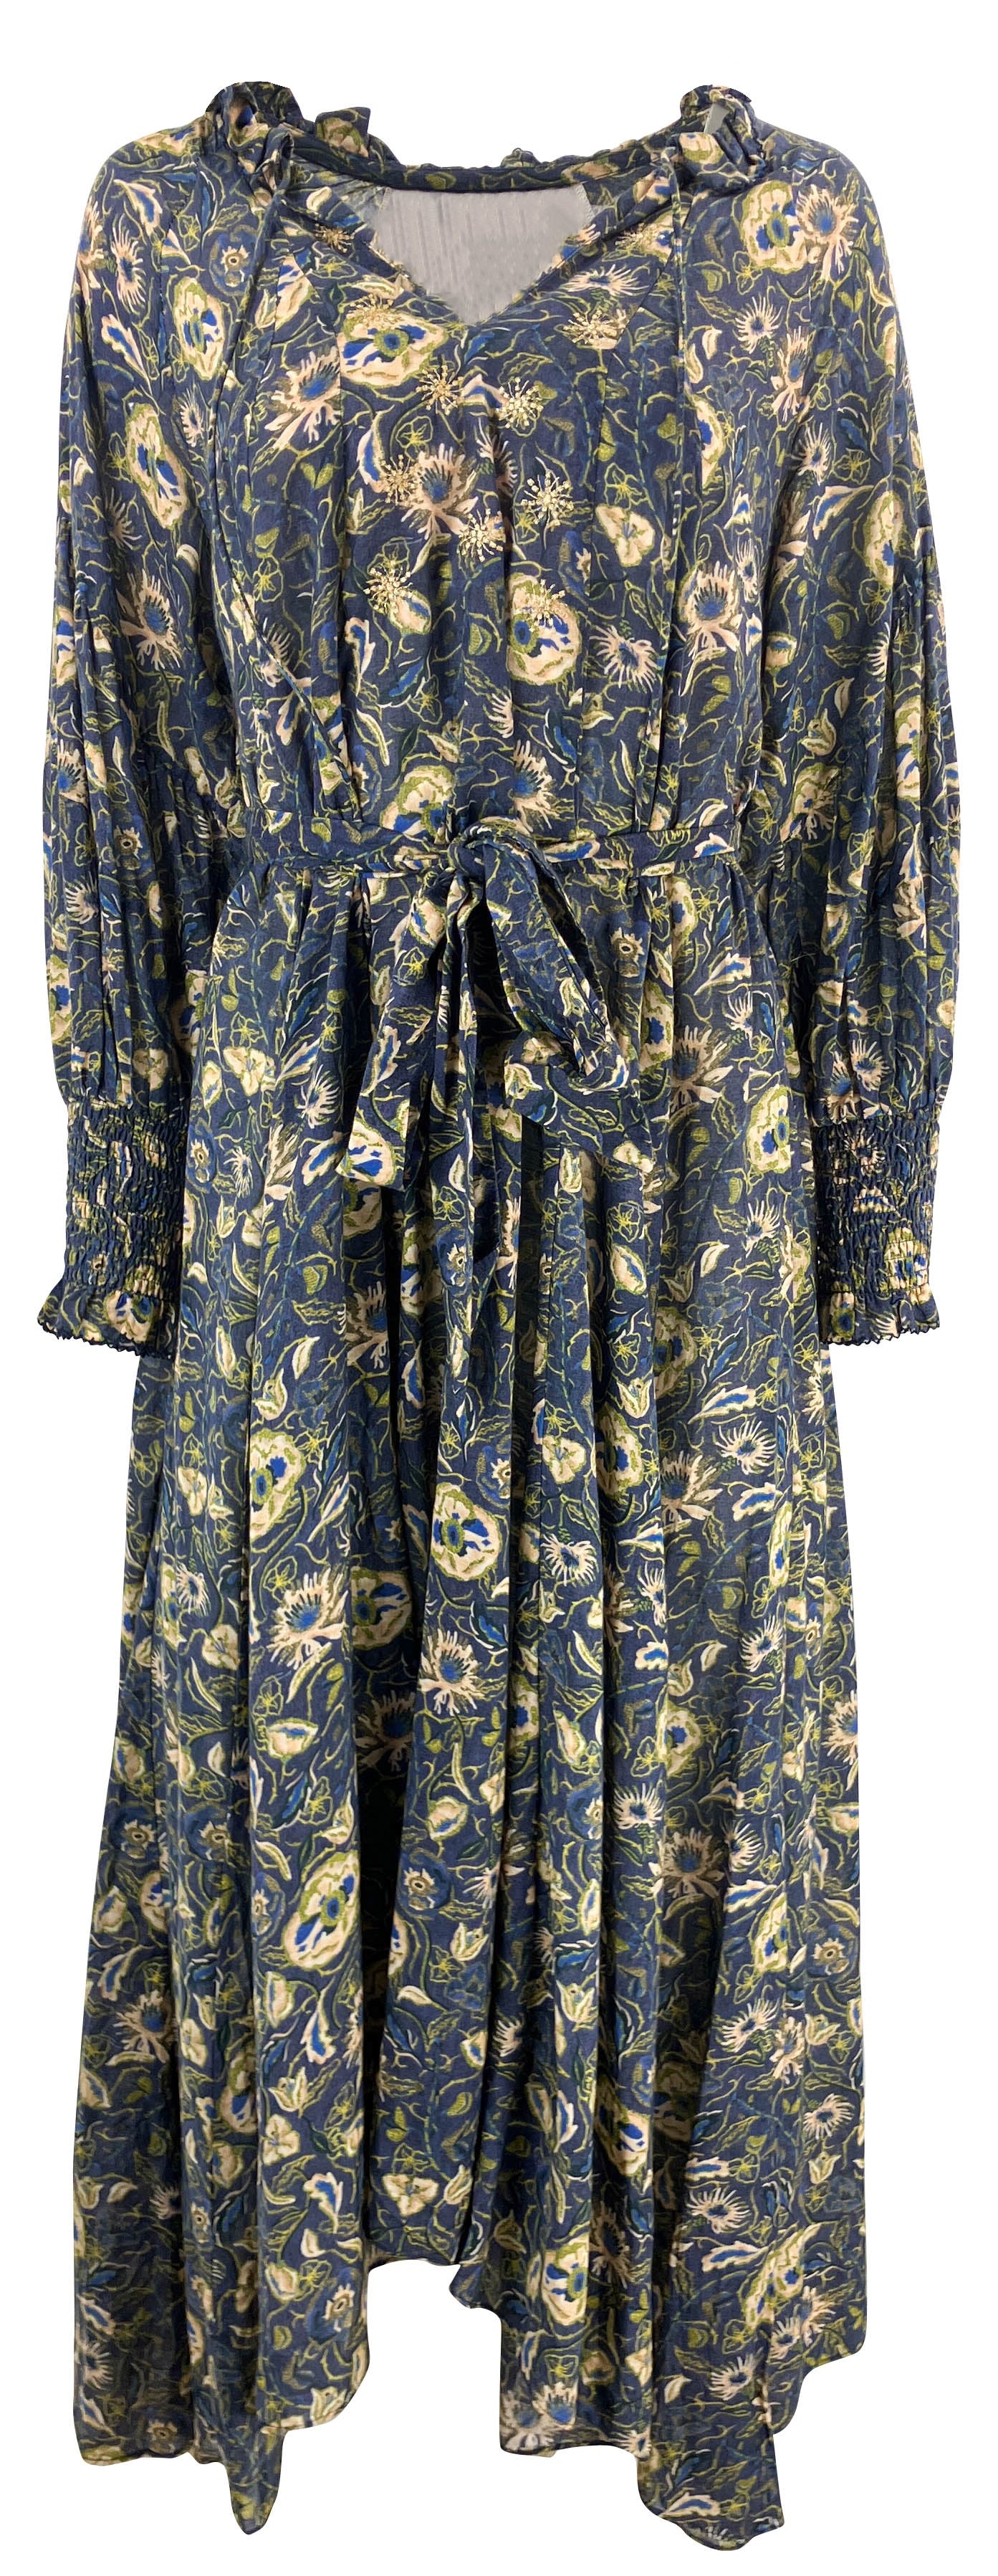 Chufy Belted Midi Dress in Navy Floral - Discounts on Chufy at UAL